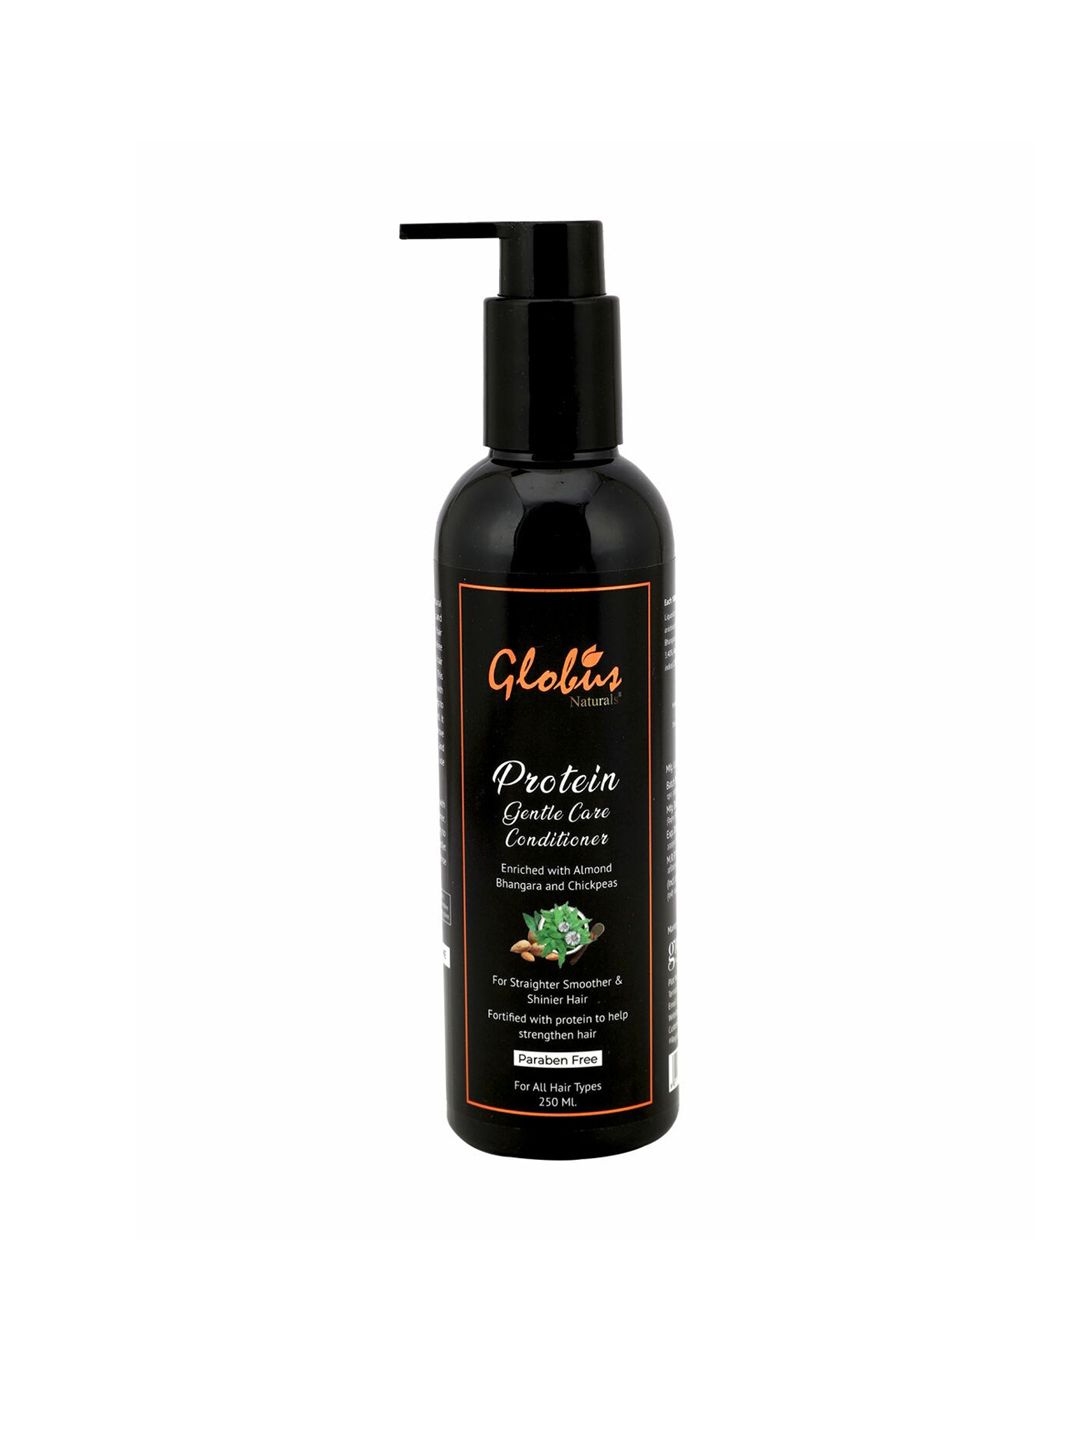 Globus Naturals Protein Gentle Care Hair Growth Conditioner 250 ml Price in India